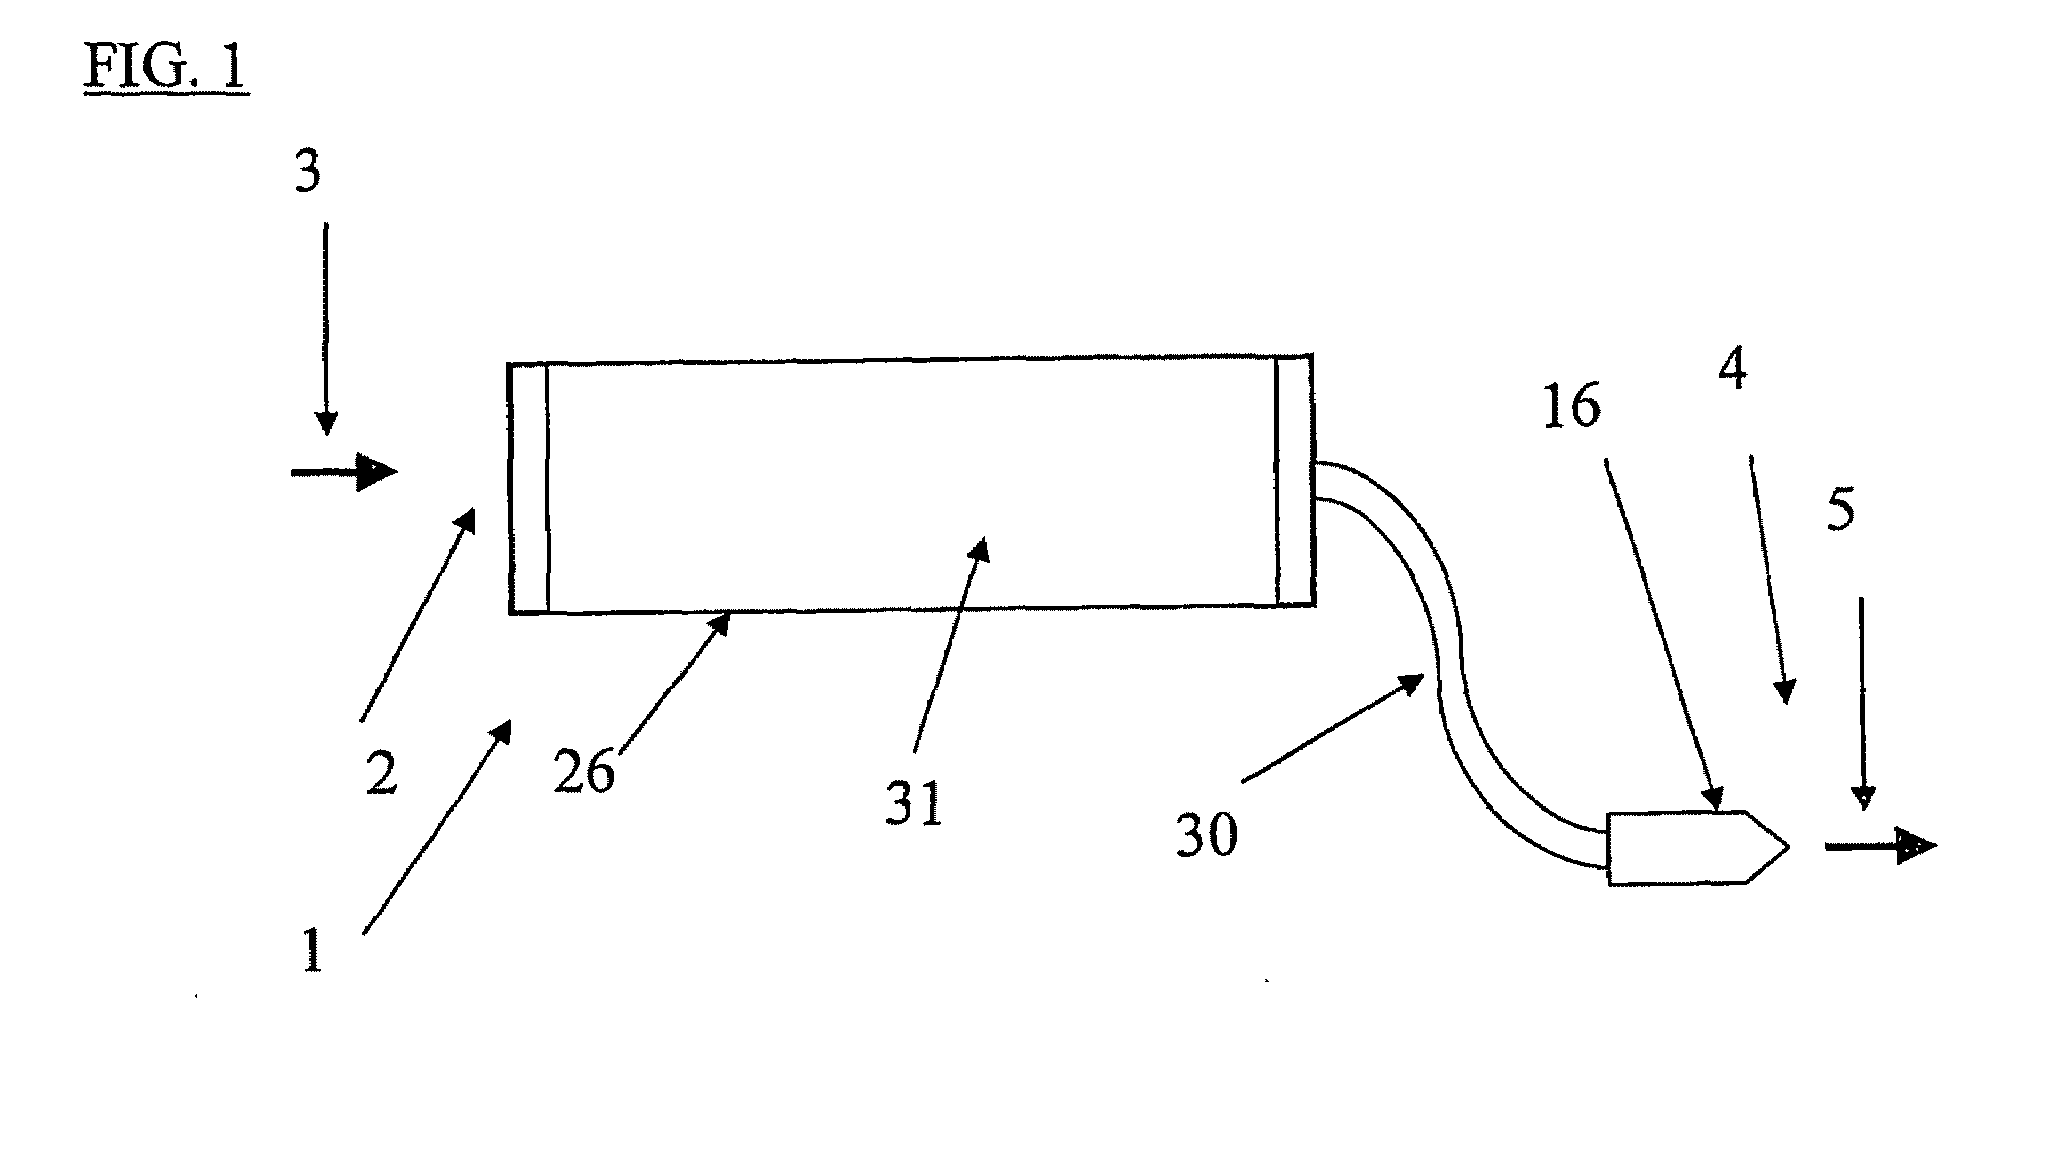 Liquid dispenser or water purification unit with antimicrobial mouthpiece or housing